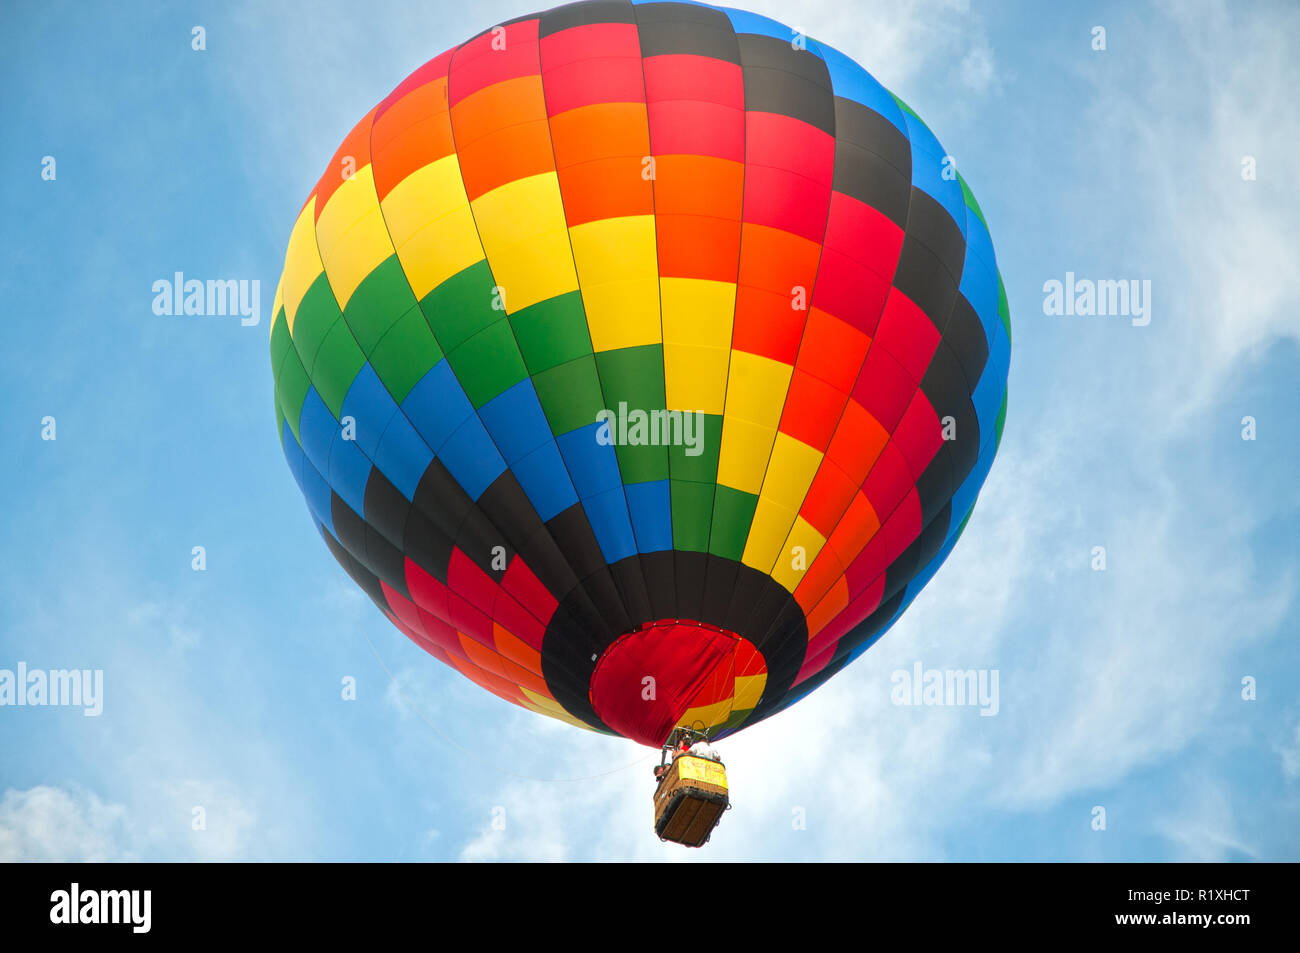 The air quality and wind helped tip the balloon to add to the excitement of the ride. Stock Photo